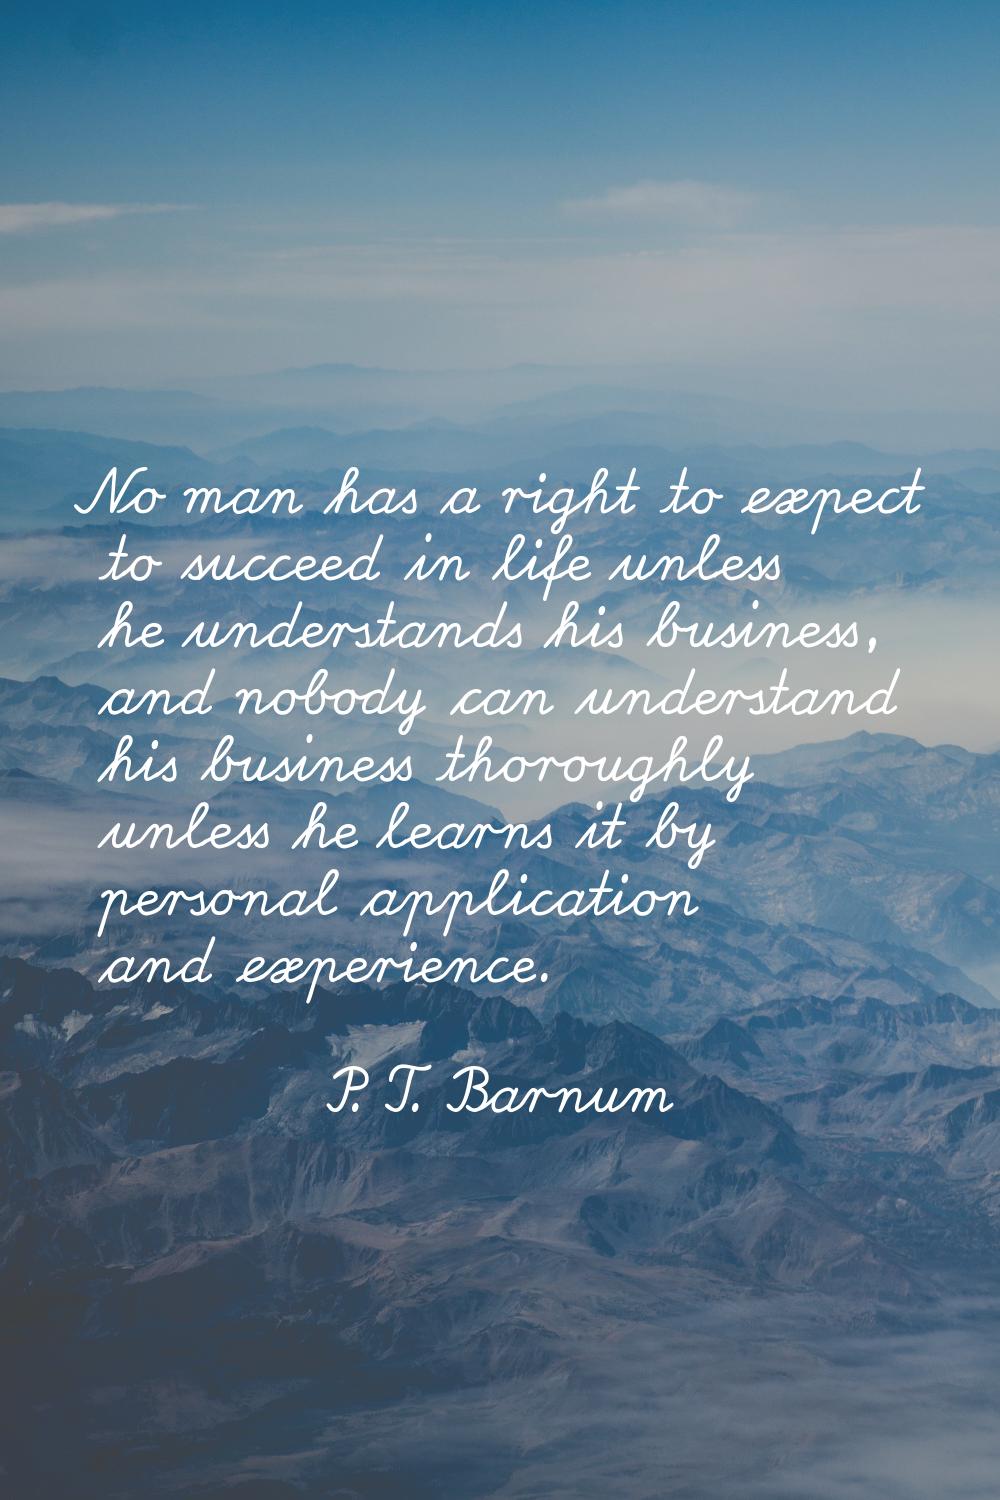 No man has a right to expect to succeed in life unless he understands his business, and nobody can 